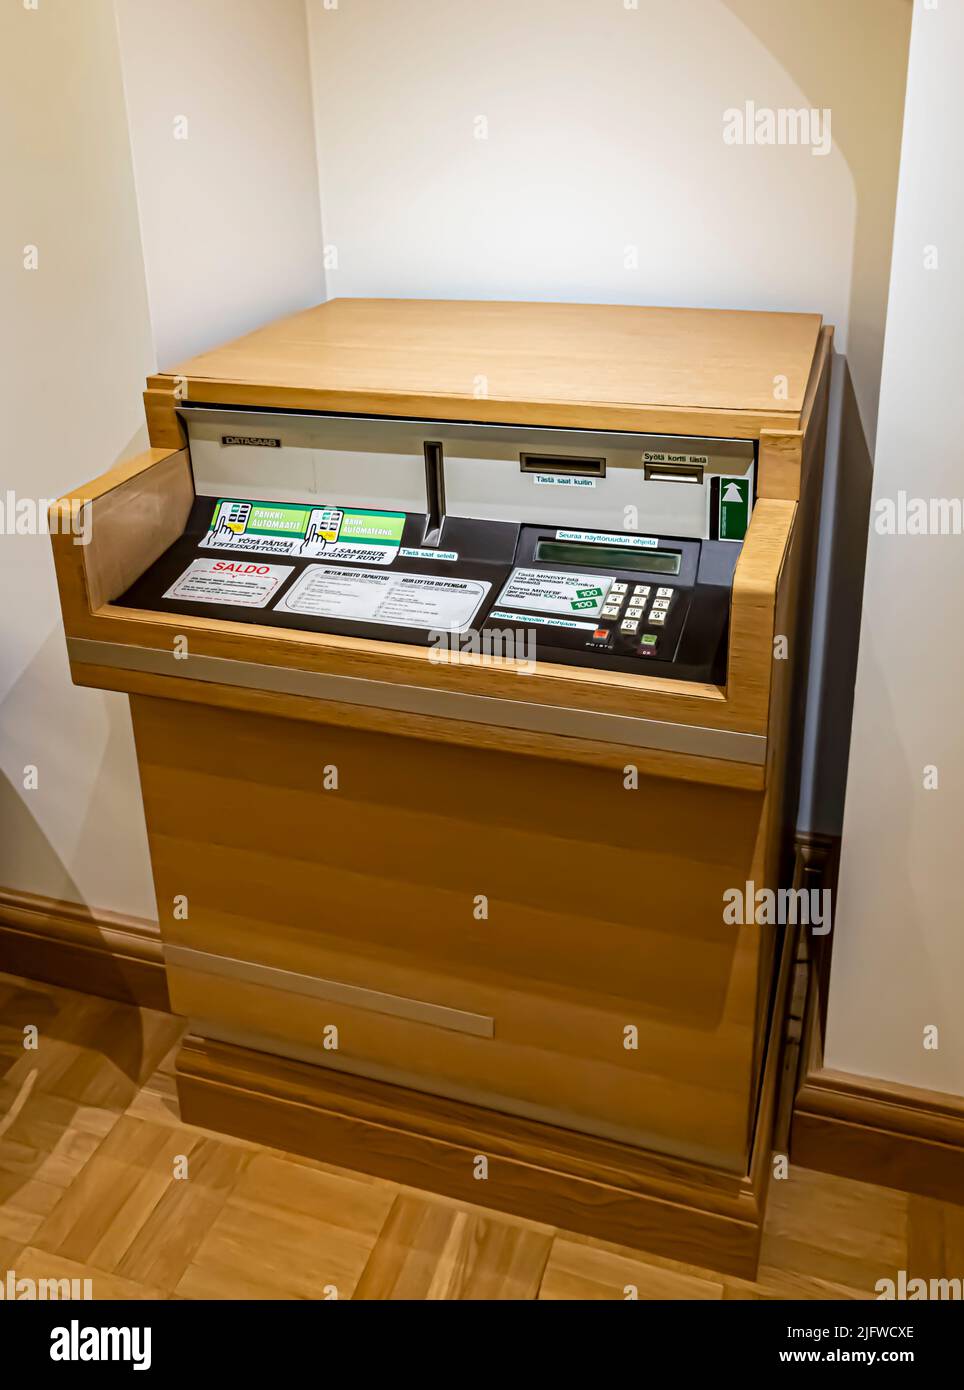 An early Union Bank of Finland Minisyp automated teller machine manufactured by Datasaab, on display in the Nordea Bank Museum in Helsinki, Finland. Stock Photo